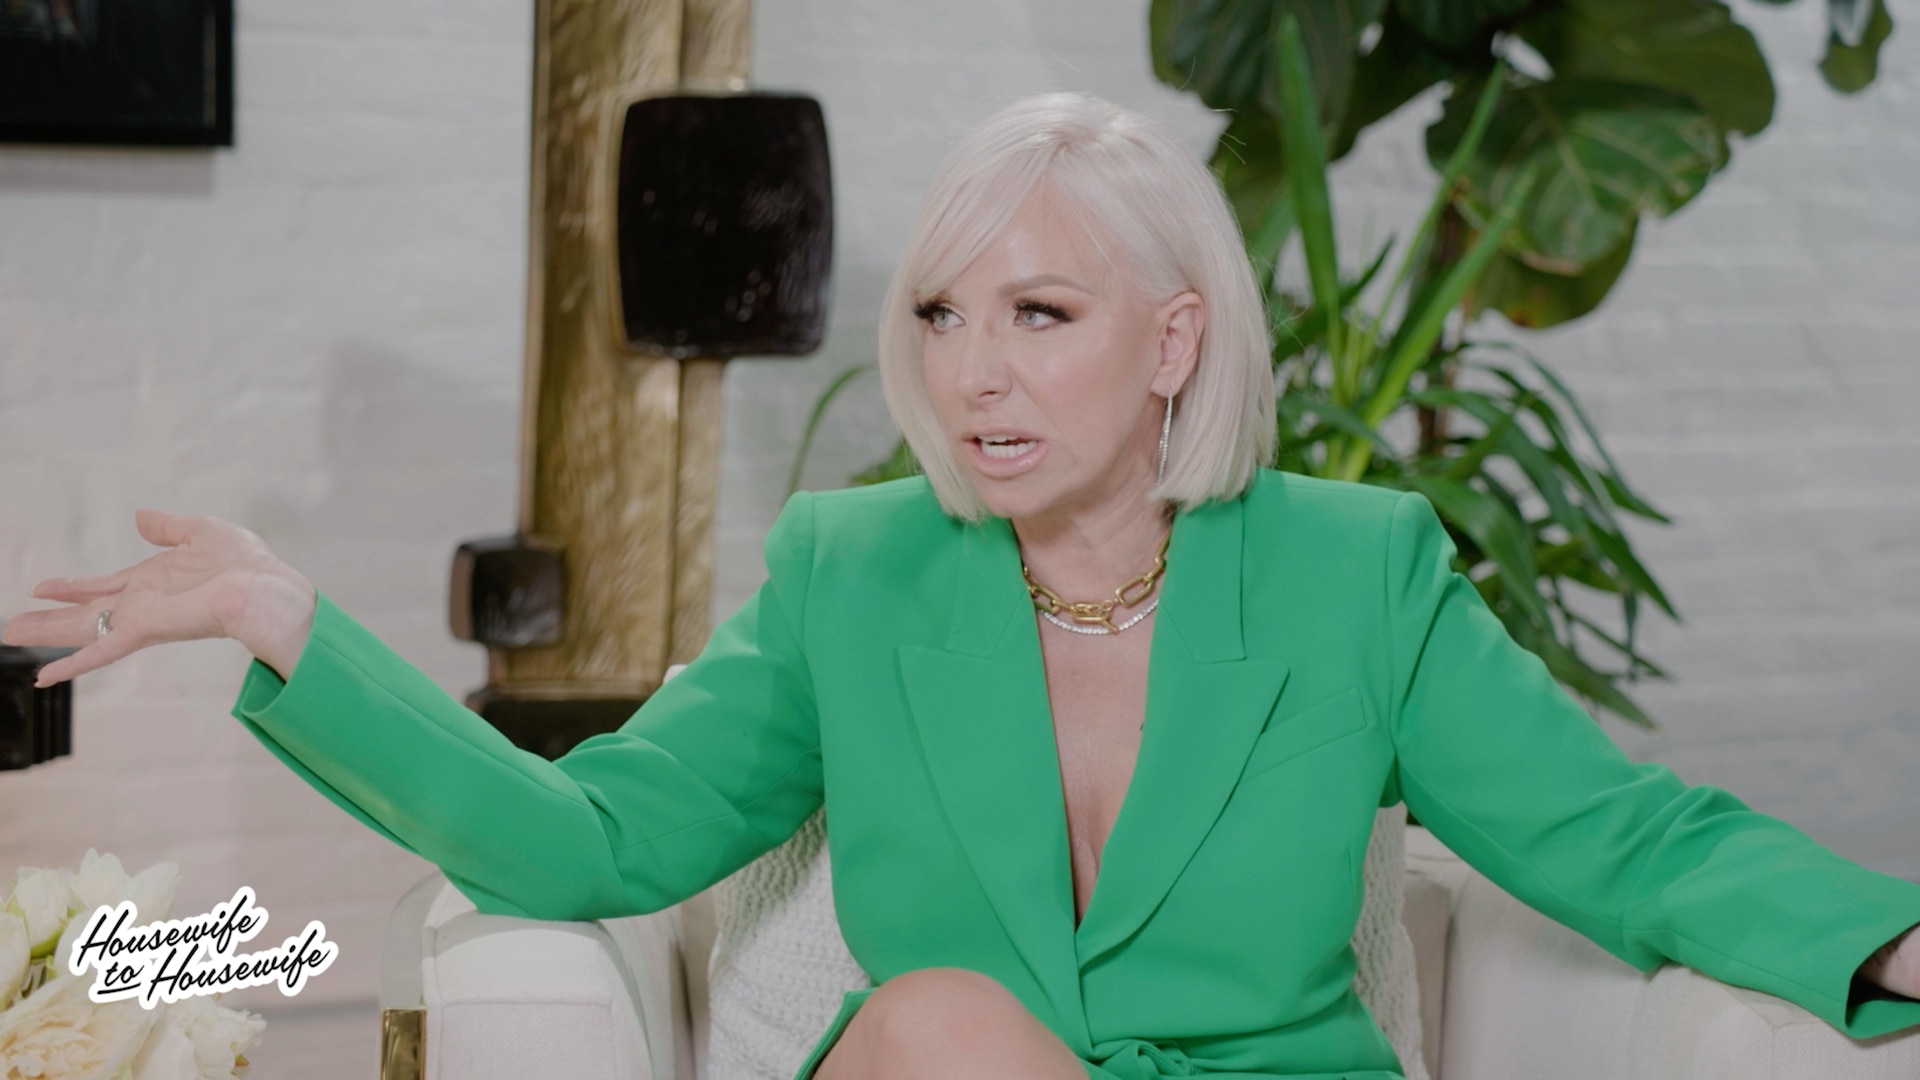 Margaret Josephs Reflects on Her First Season of RHONJ: "What Was I Thinking?"